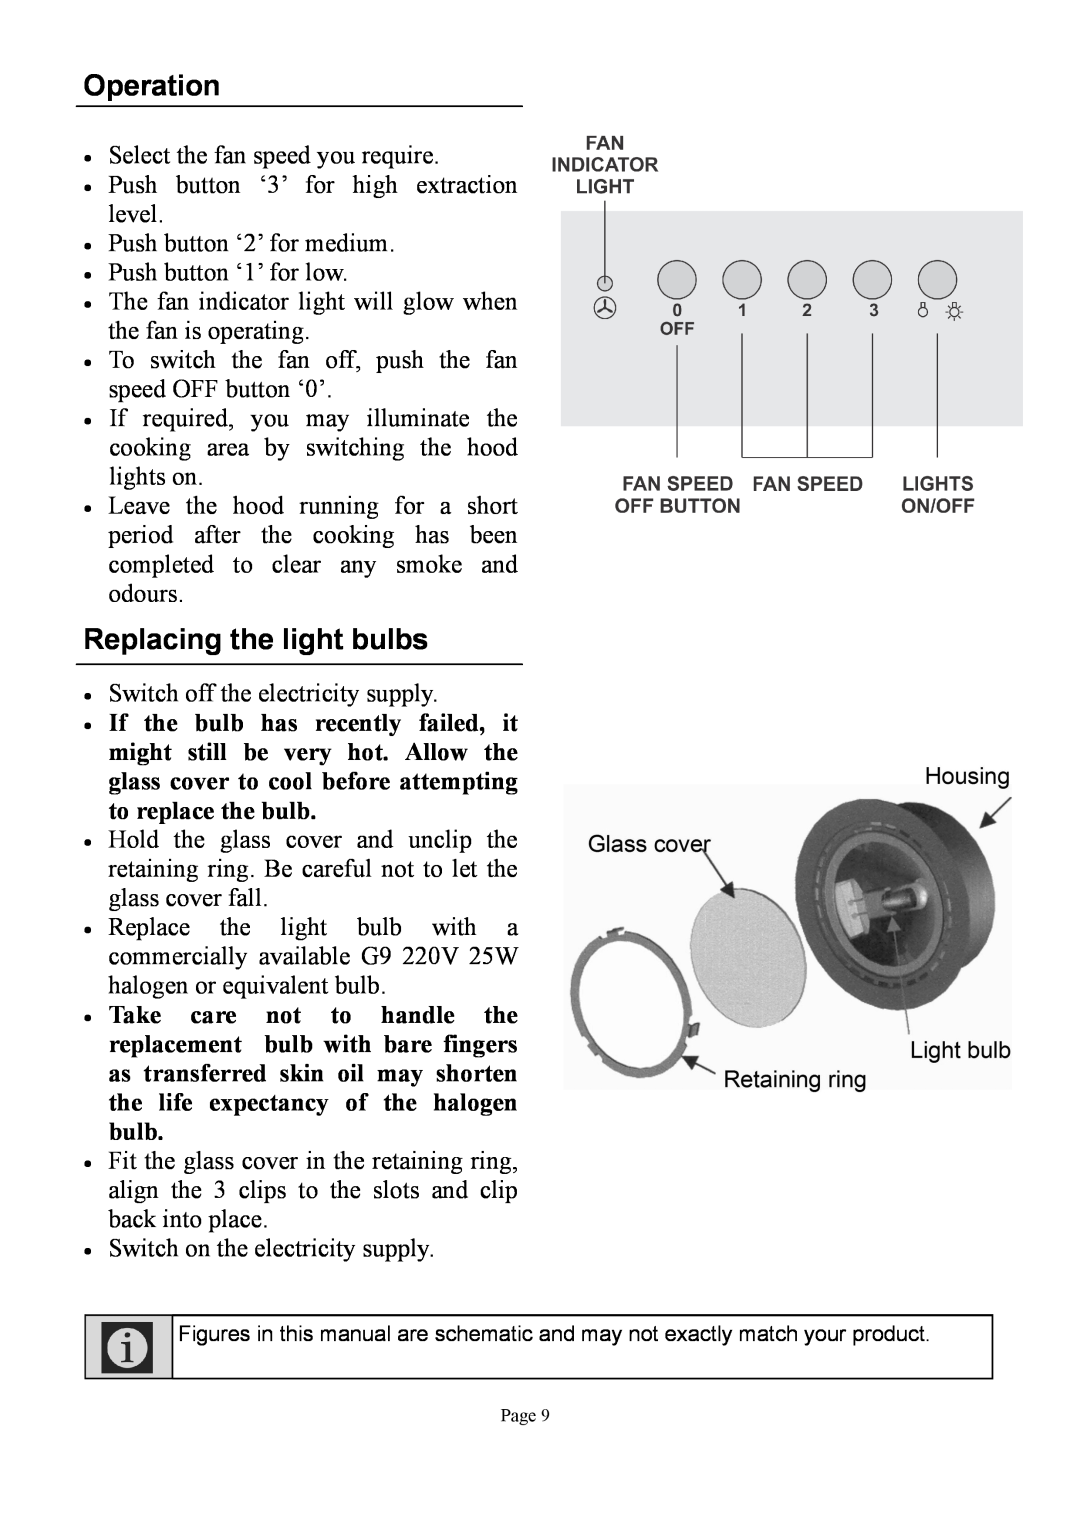 Defy Appliances DCH309 manual Operation, Replacing the light bulbs 